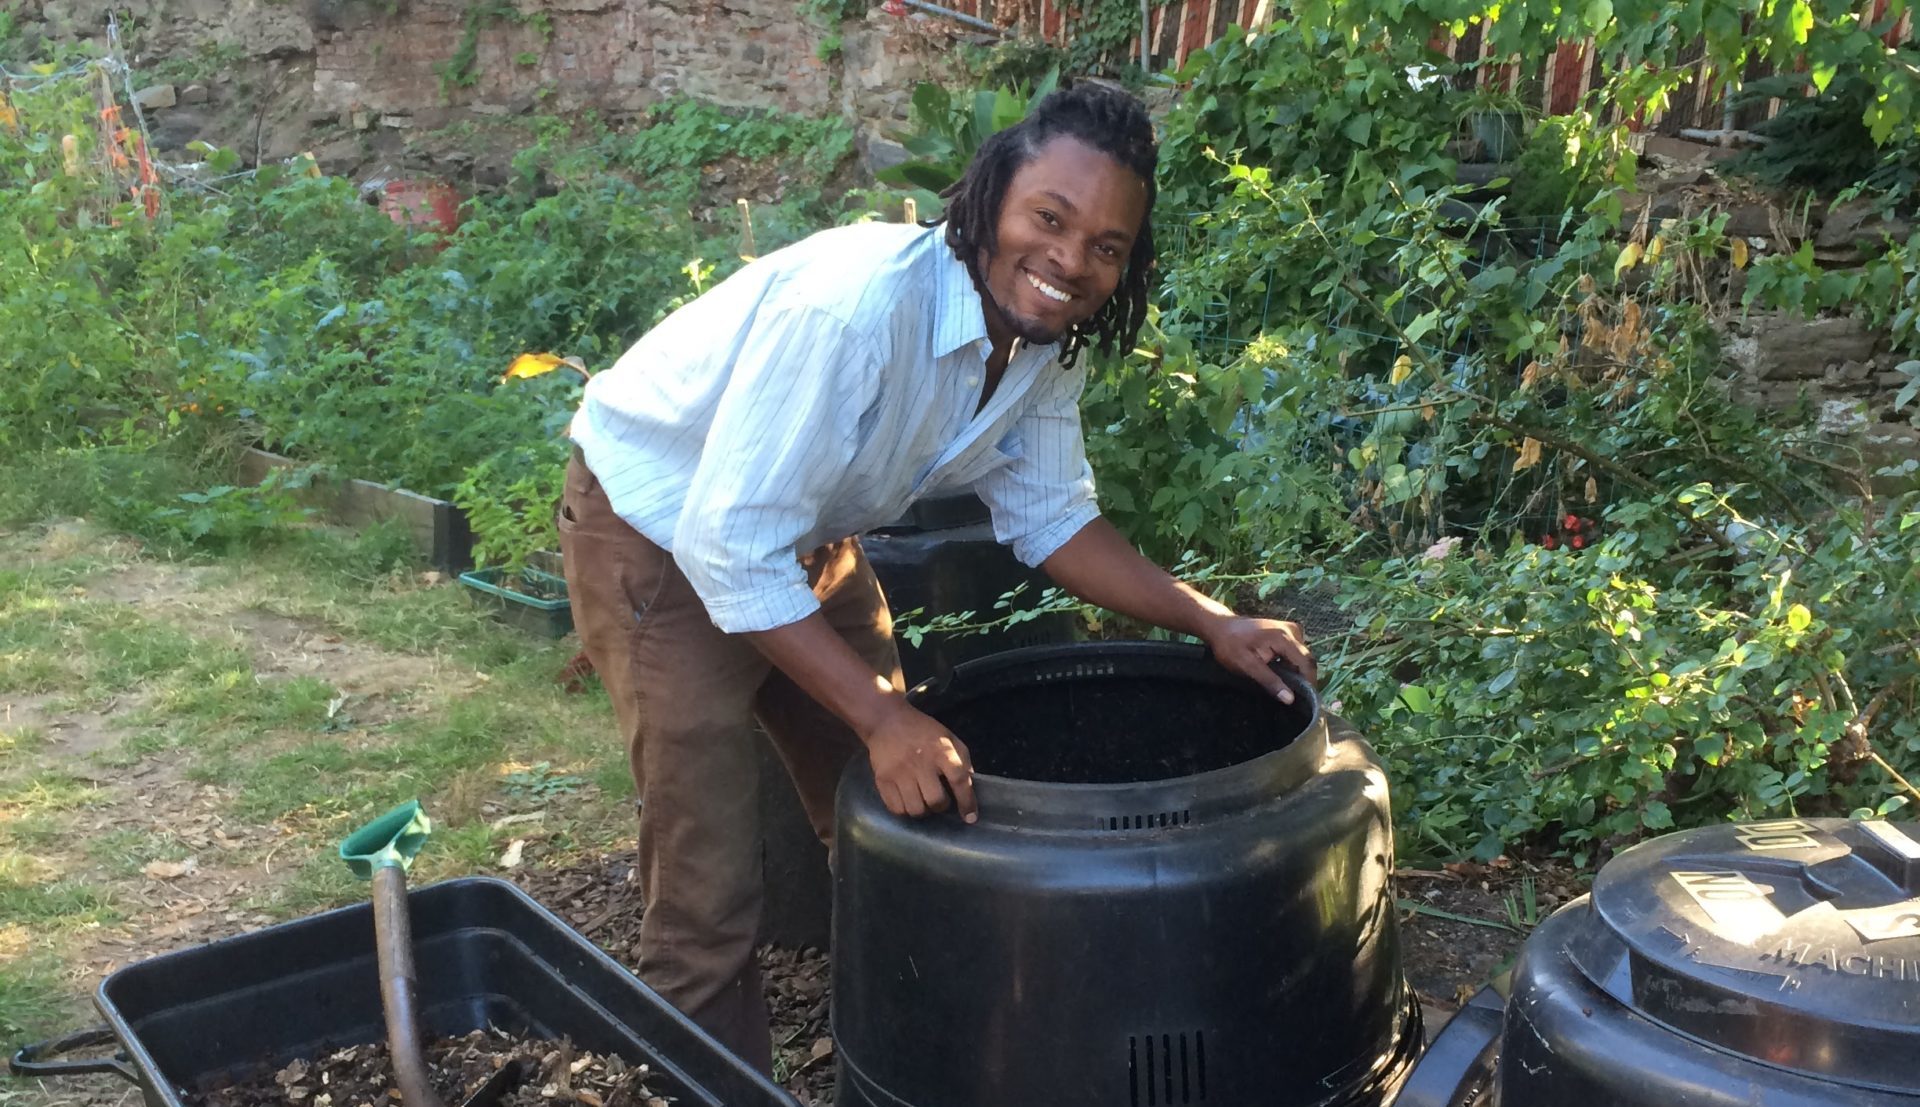 Home Composting: Its Time Has Come – Institute for Local Self-Reliance